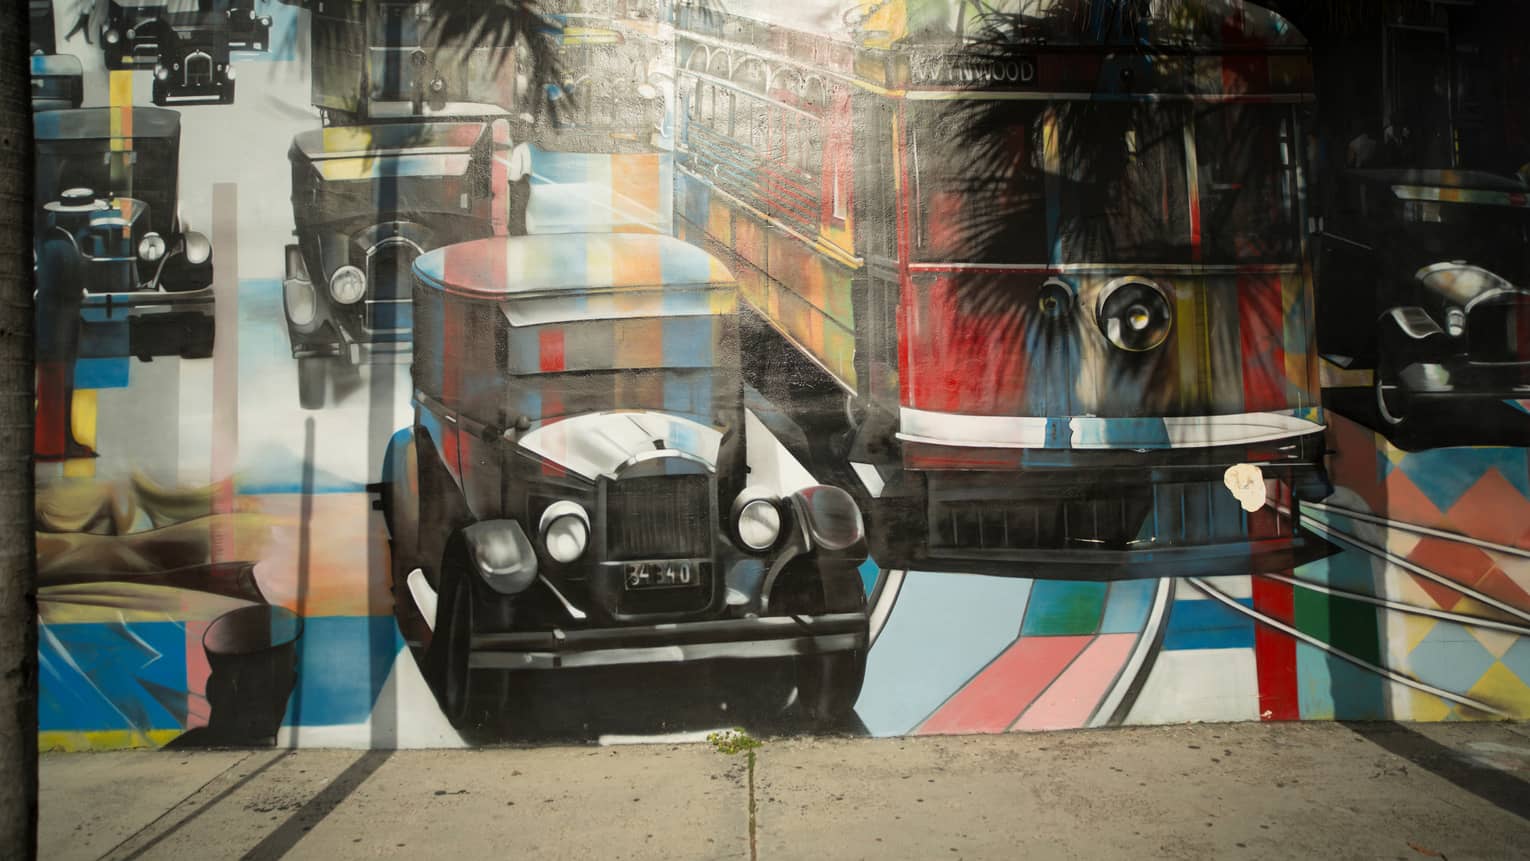 Palm trees cast shadows on a mural of vintage cars and a bus painted in a kaleiscopic pattern of colours and grey shading.